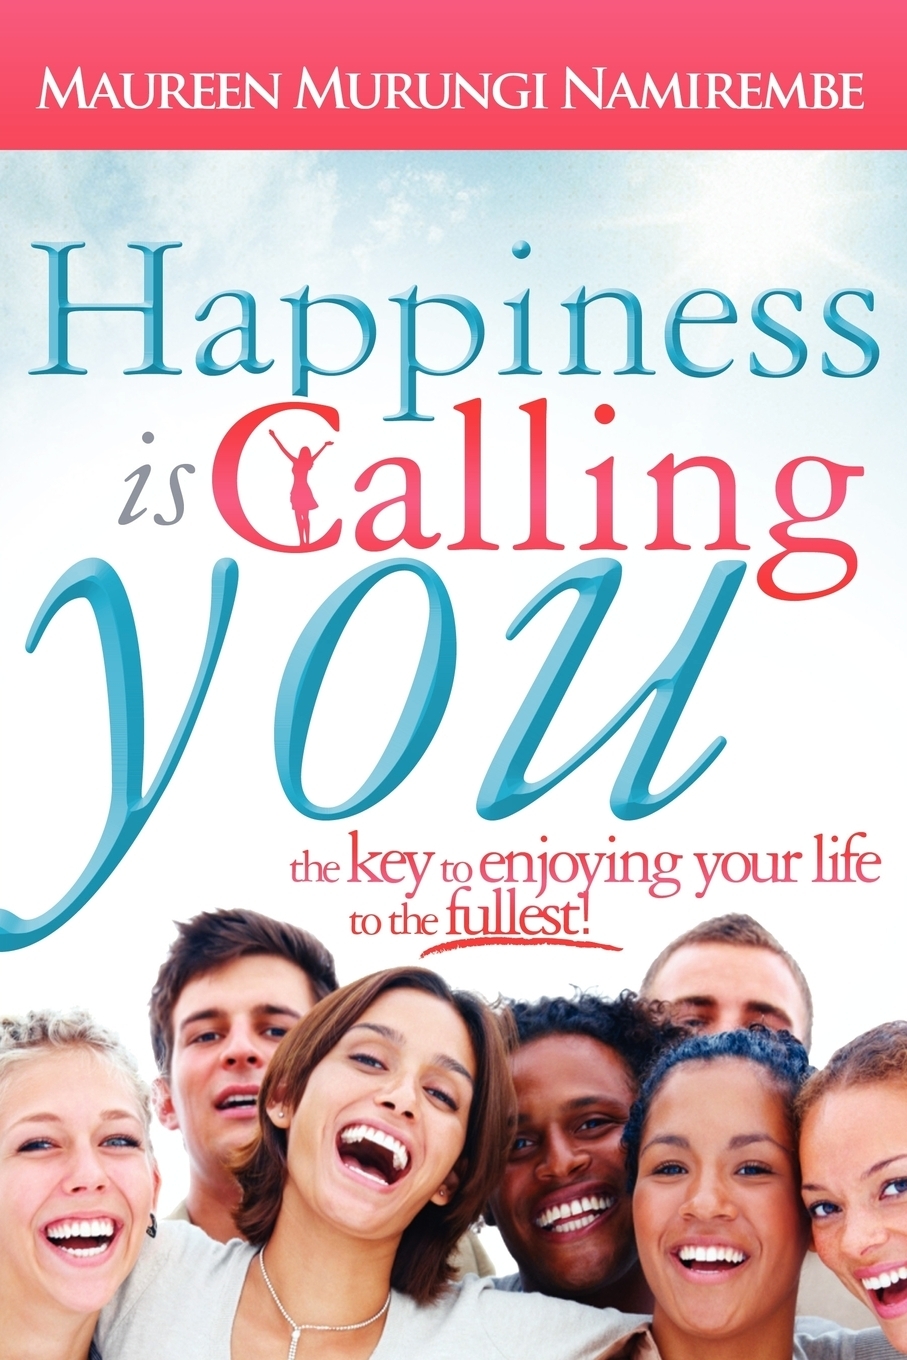 Happiness Is Calling You. The Key to Enjoying Your Life to the Fullest